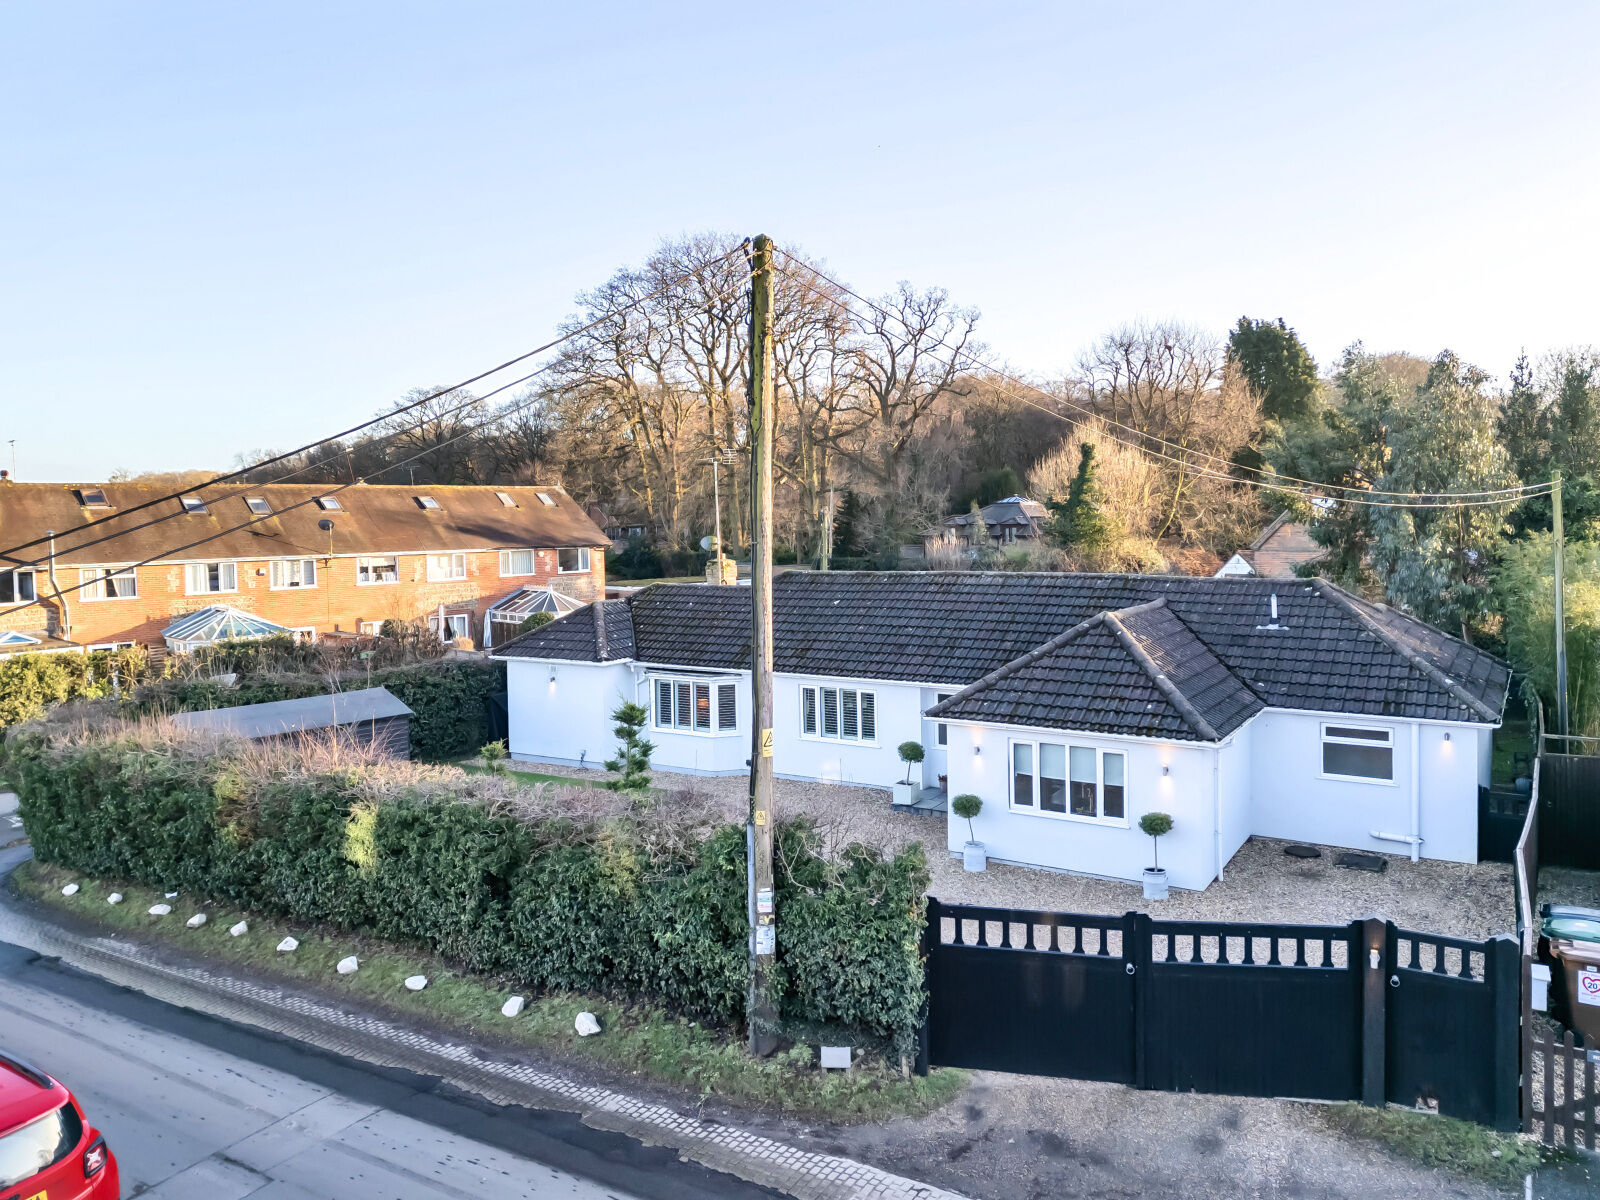 4 bedroom detached bungalow for sale Stoke Row, Henley-on-Thames, RG9, main image